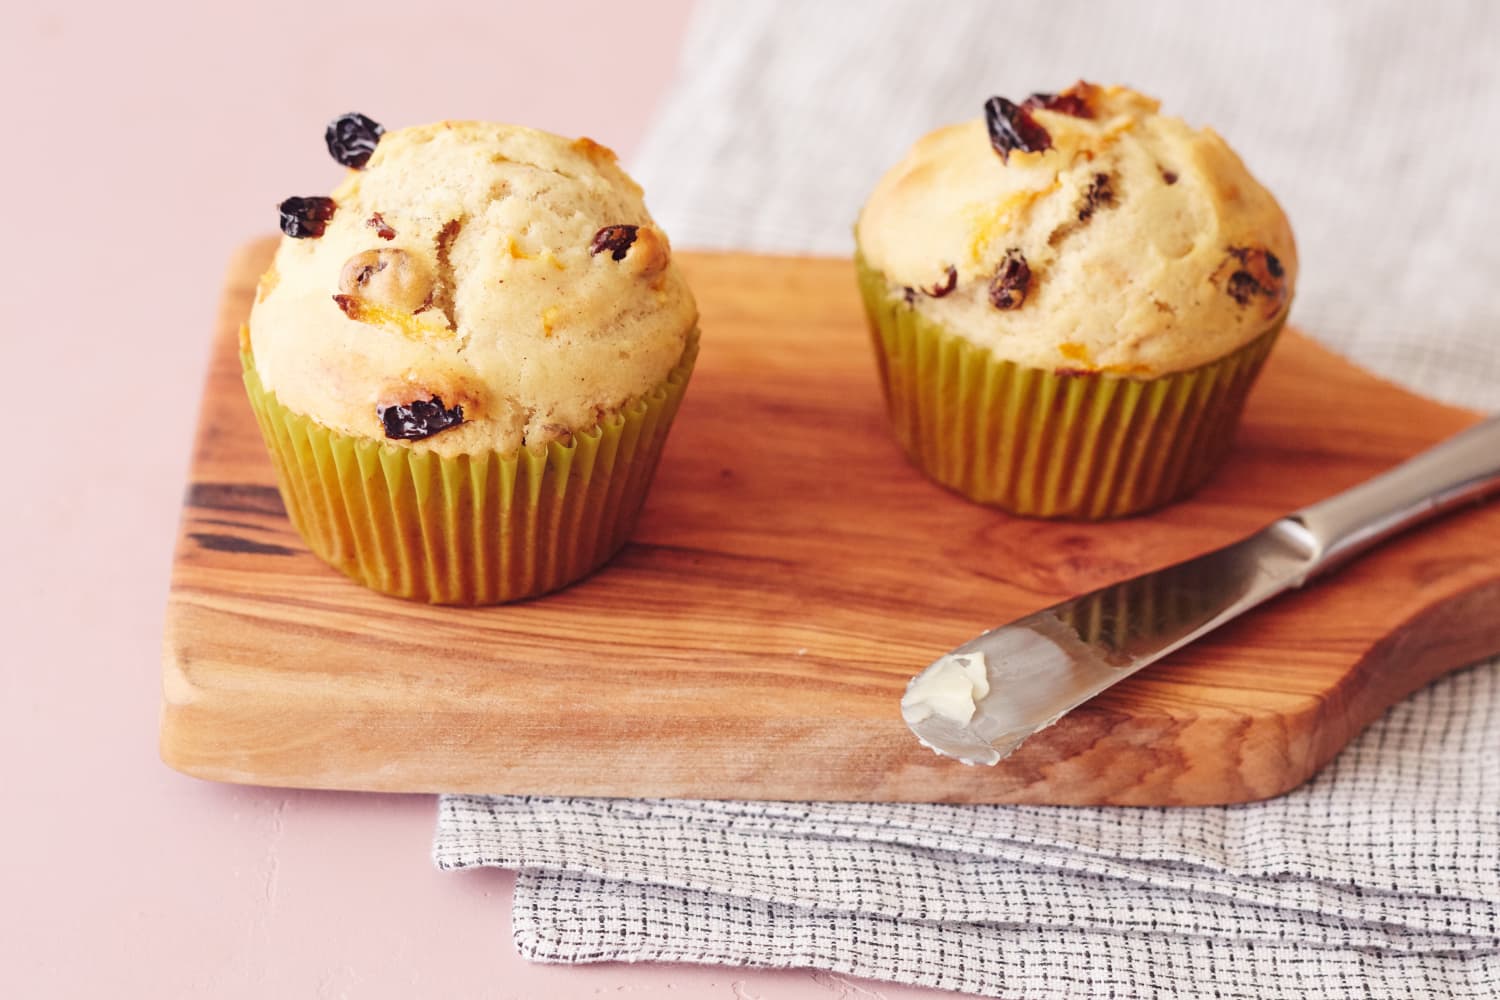 How To Make Muffins: The Simplest, Easiest Method